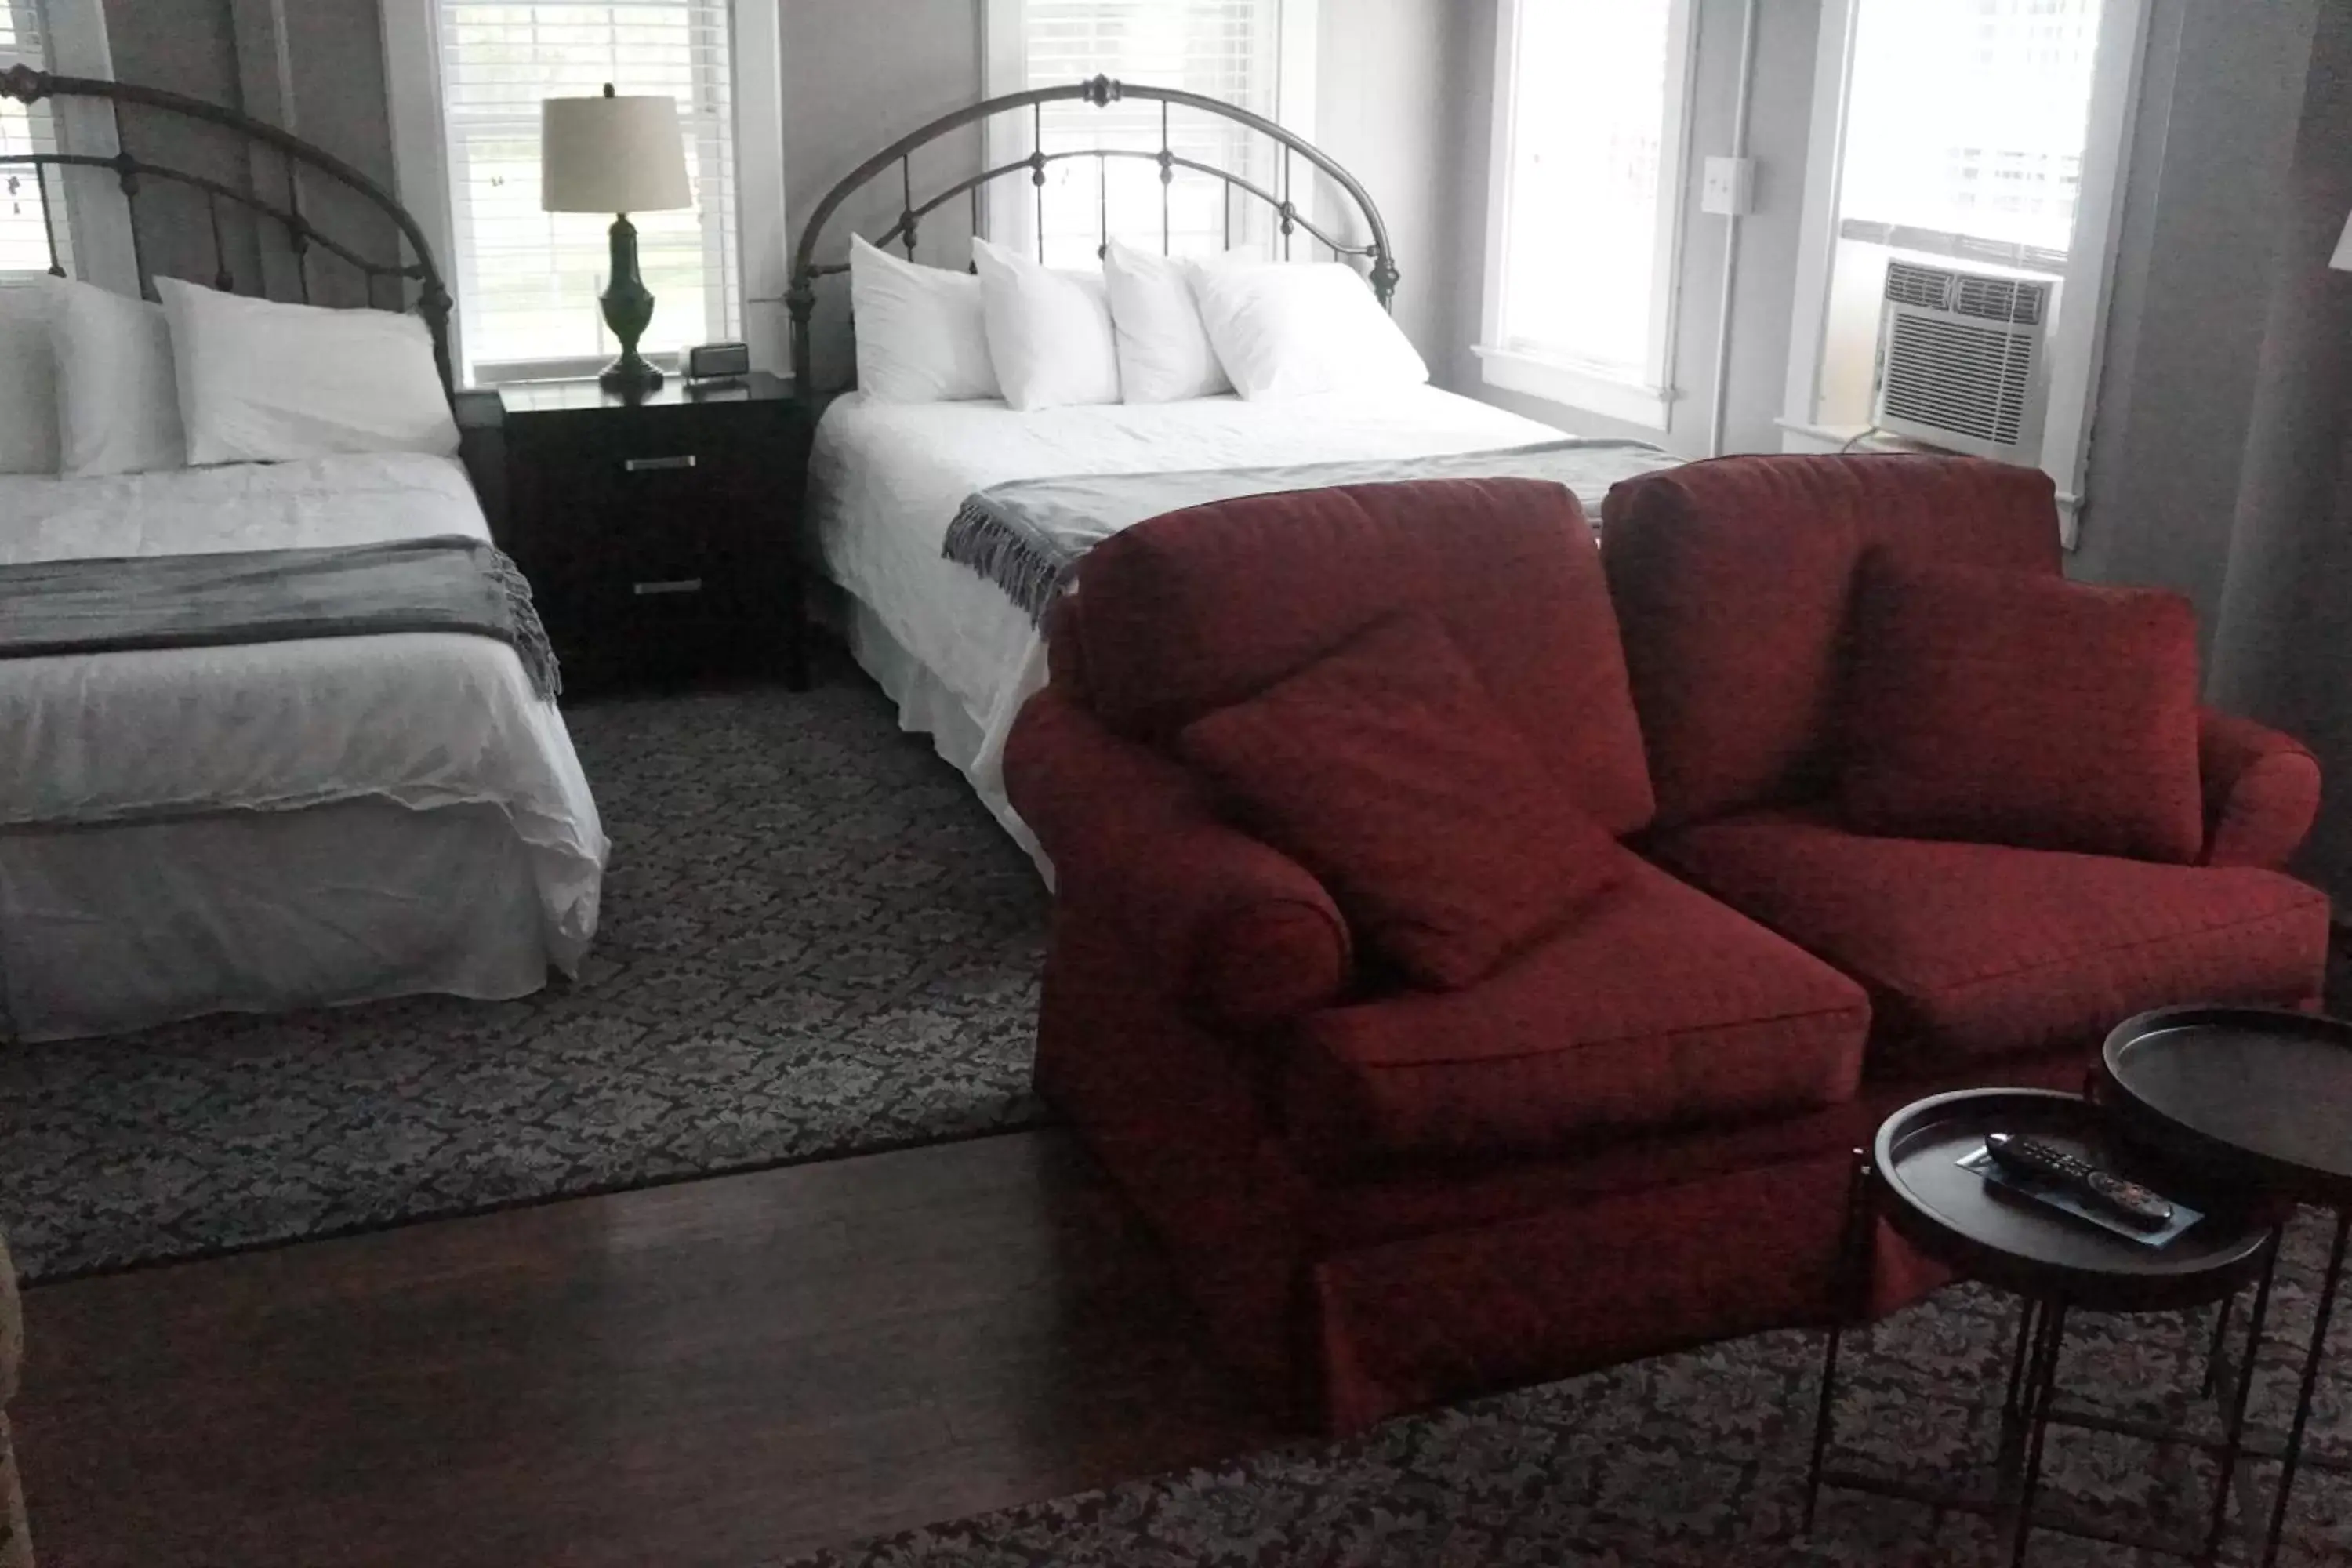 Bed in The Frogtown Inn